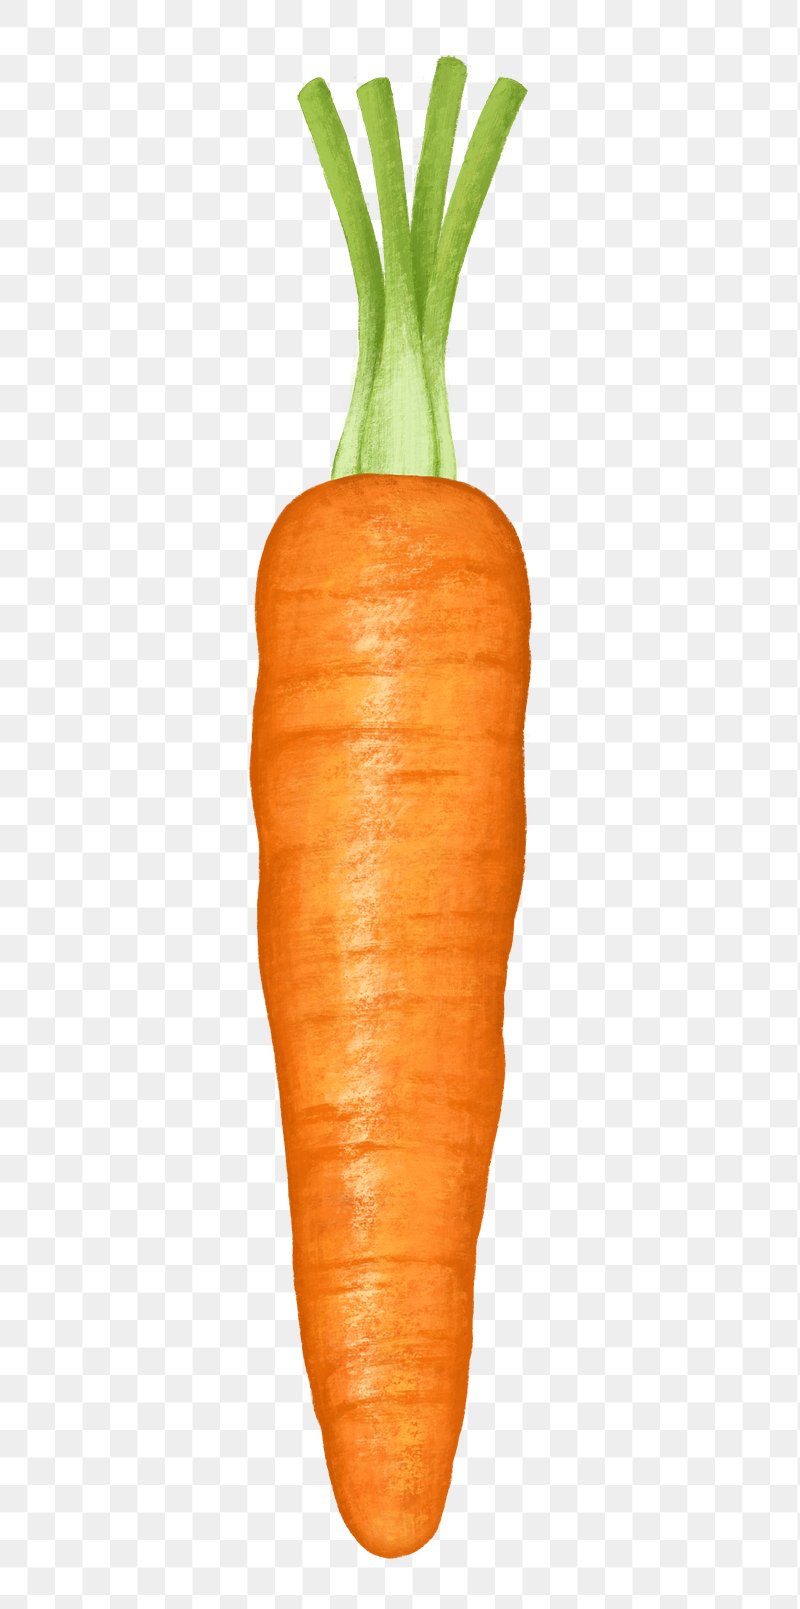 Carrot Sticker Images | Free Photos, PNG Stickers, Wallpapers ...